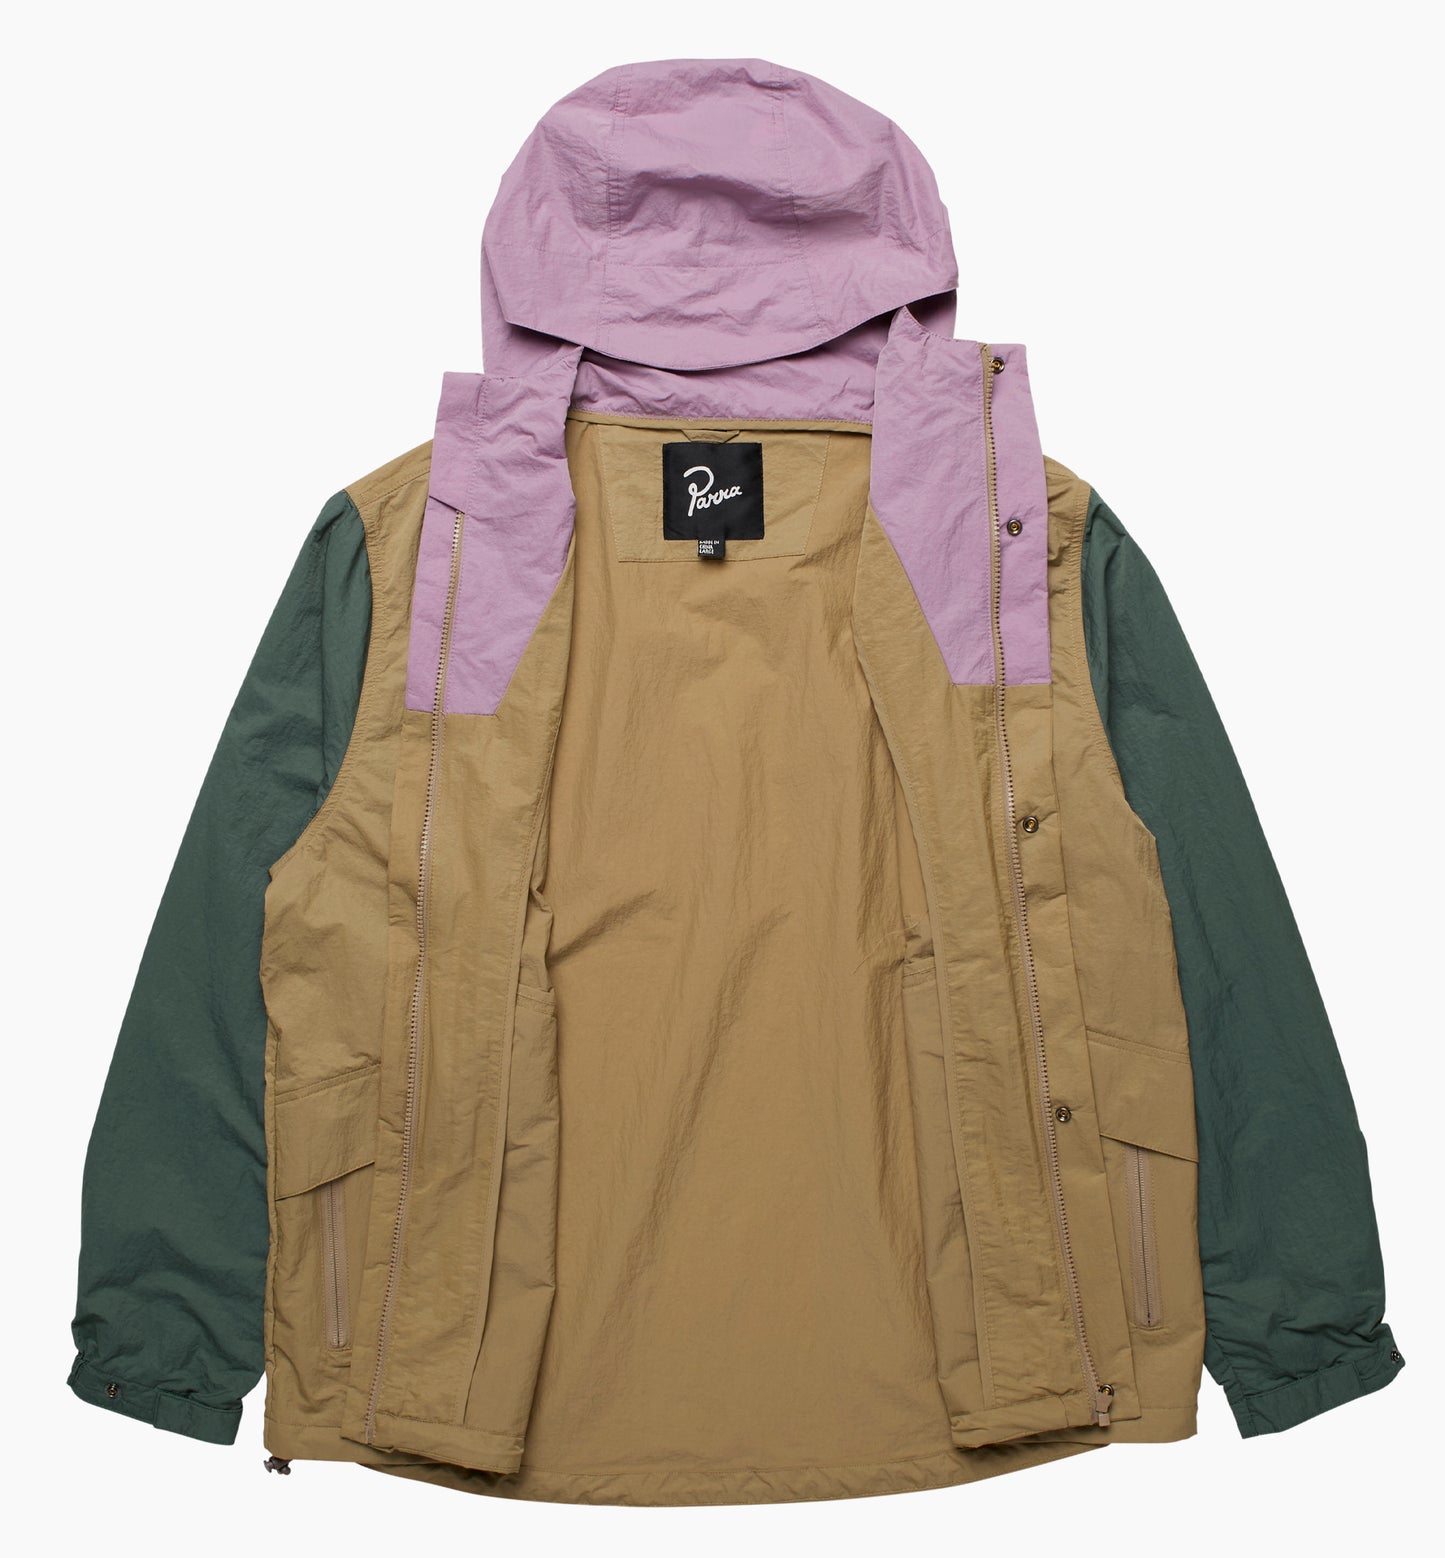 By Parra Distorted Logo Jacket Sand